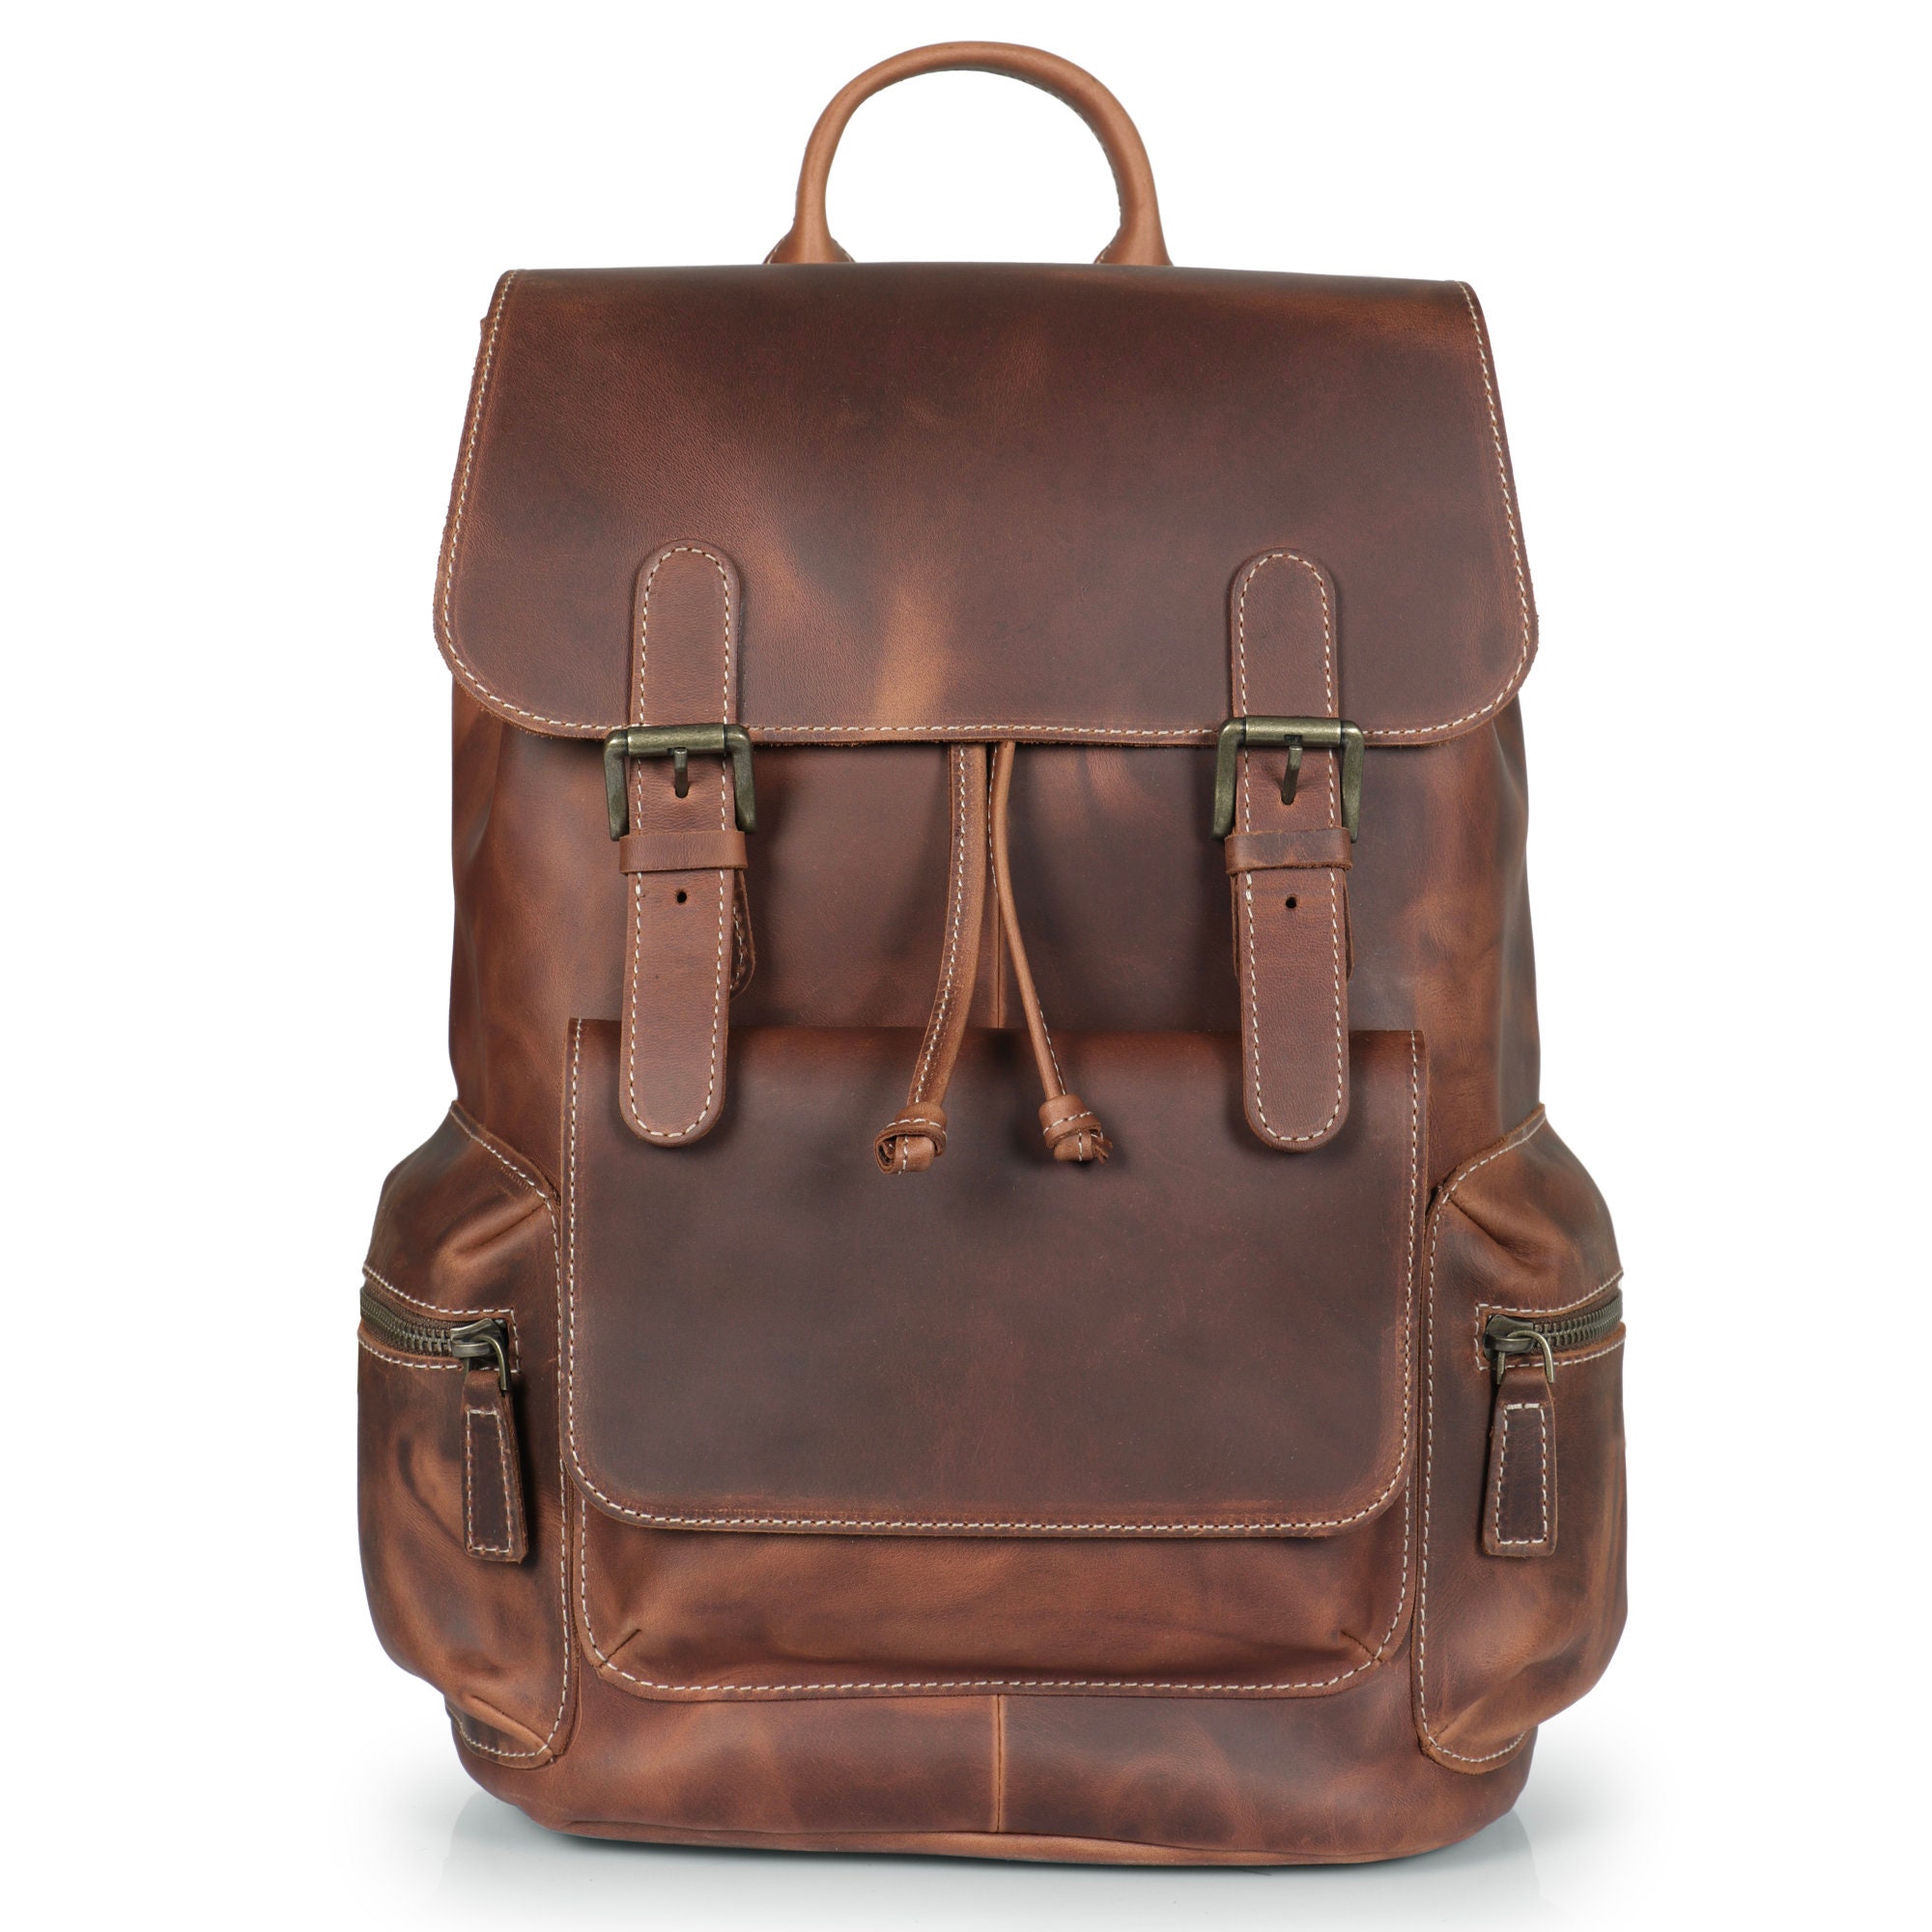 Buy Business Slim Leather Backpack for USD 99.99